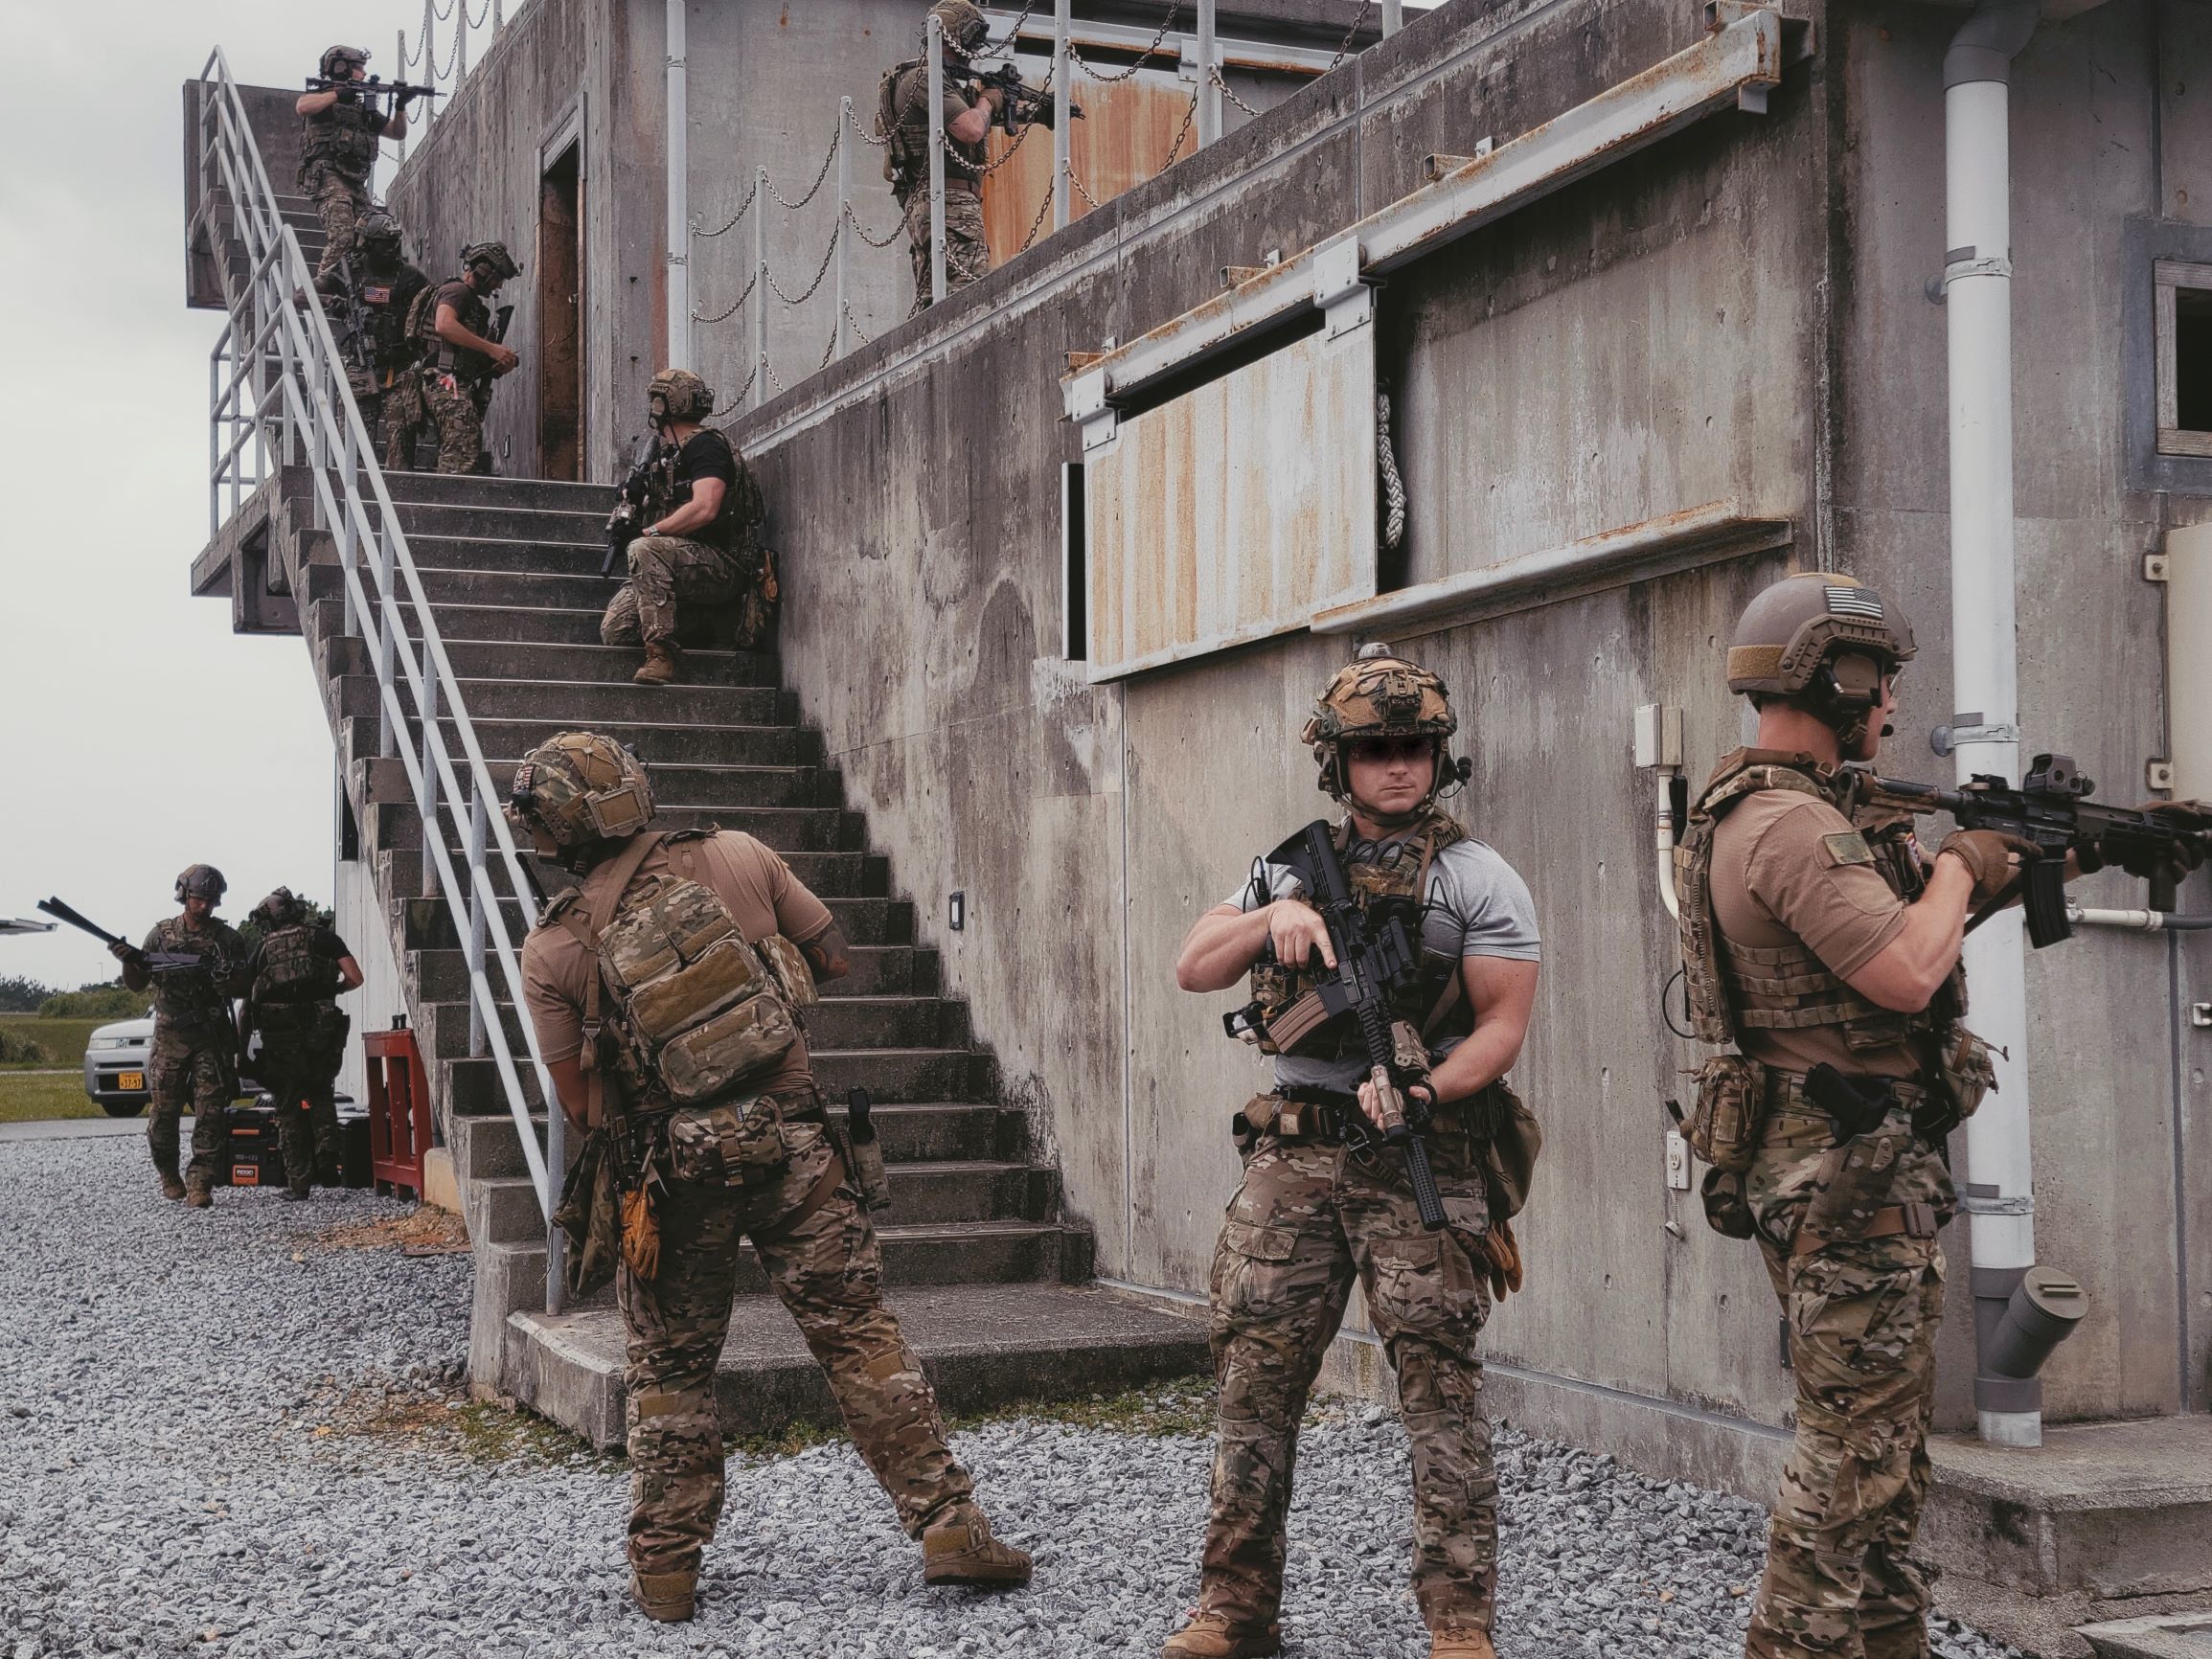 OKINAWA, Japan – Soldiers with 1st Battalion, 1st Special Forces Group (Airborne) and EOD Mobile Unit 5, breach a building during an assault on an objective, May 2021. Chemical, Biological, Radiological, Nuclear, and Explosives scenarios prepare the unit for contingency operations in the Pacific theatre. (U.S. Army Courtesy Photo by 1st Special Forces Group (Airborne)) (This photo has been altered for security purposes)